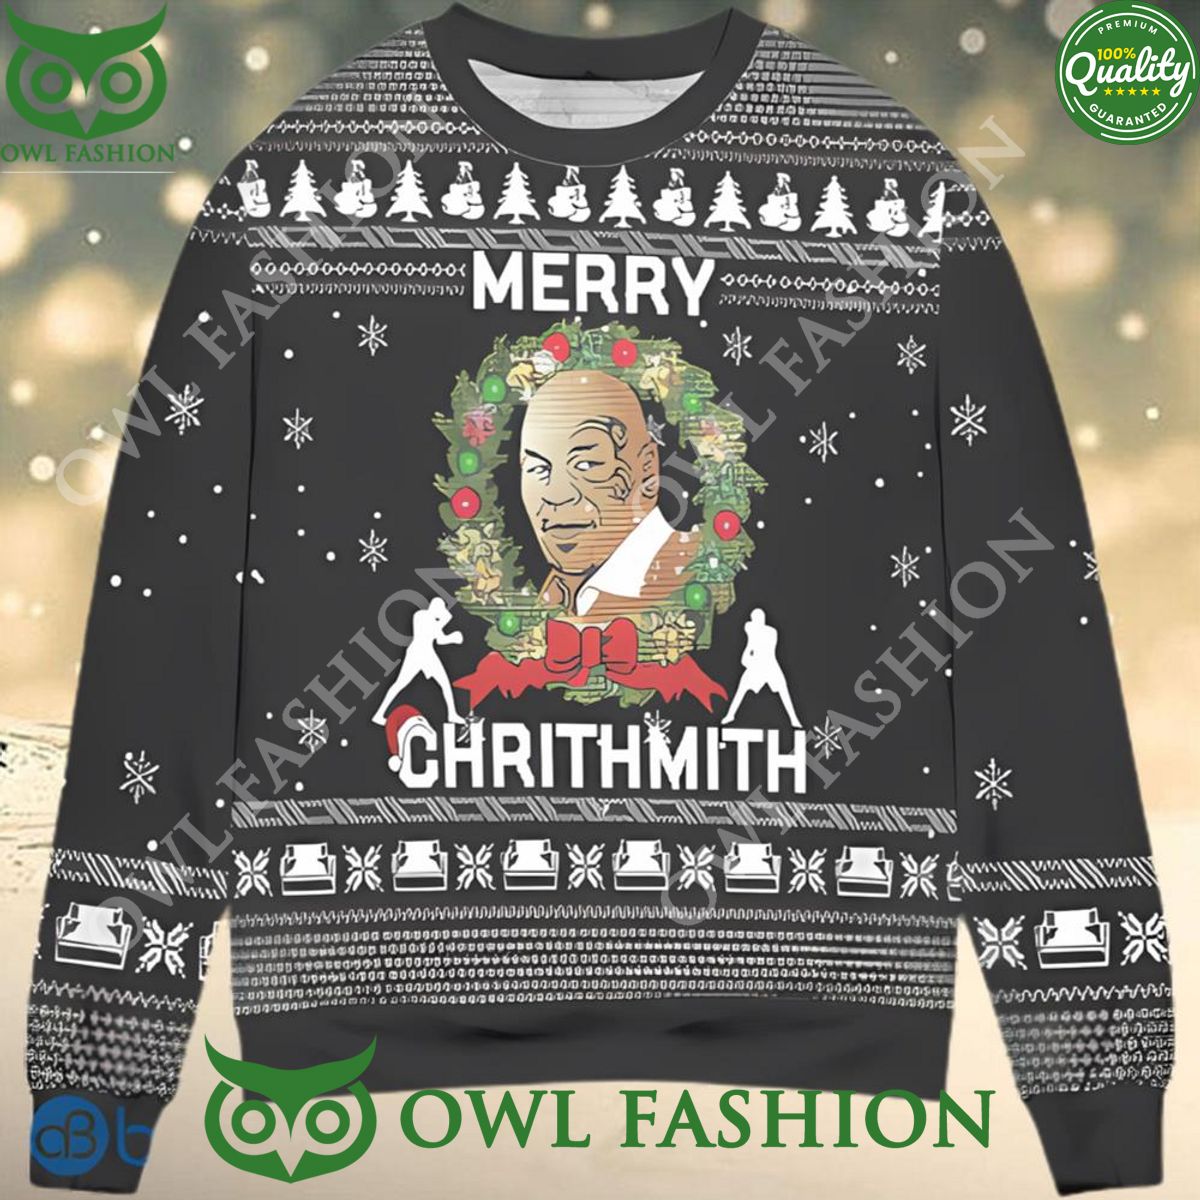 mike tyson merry chrithmith ugly christmas sweater jumper 1 6g2Q8.jpg